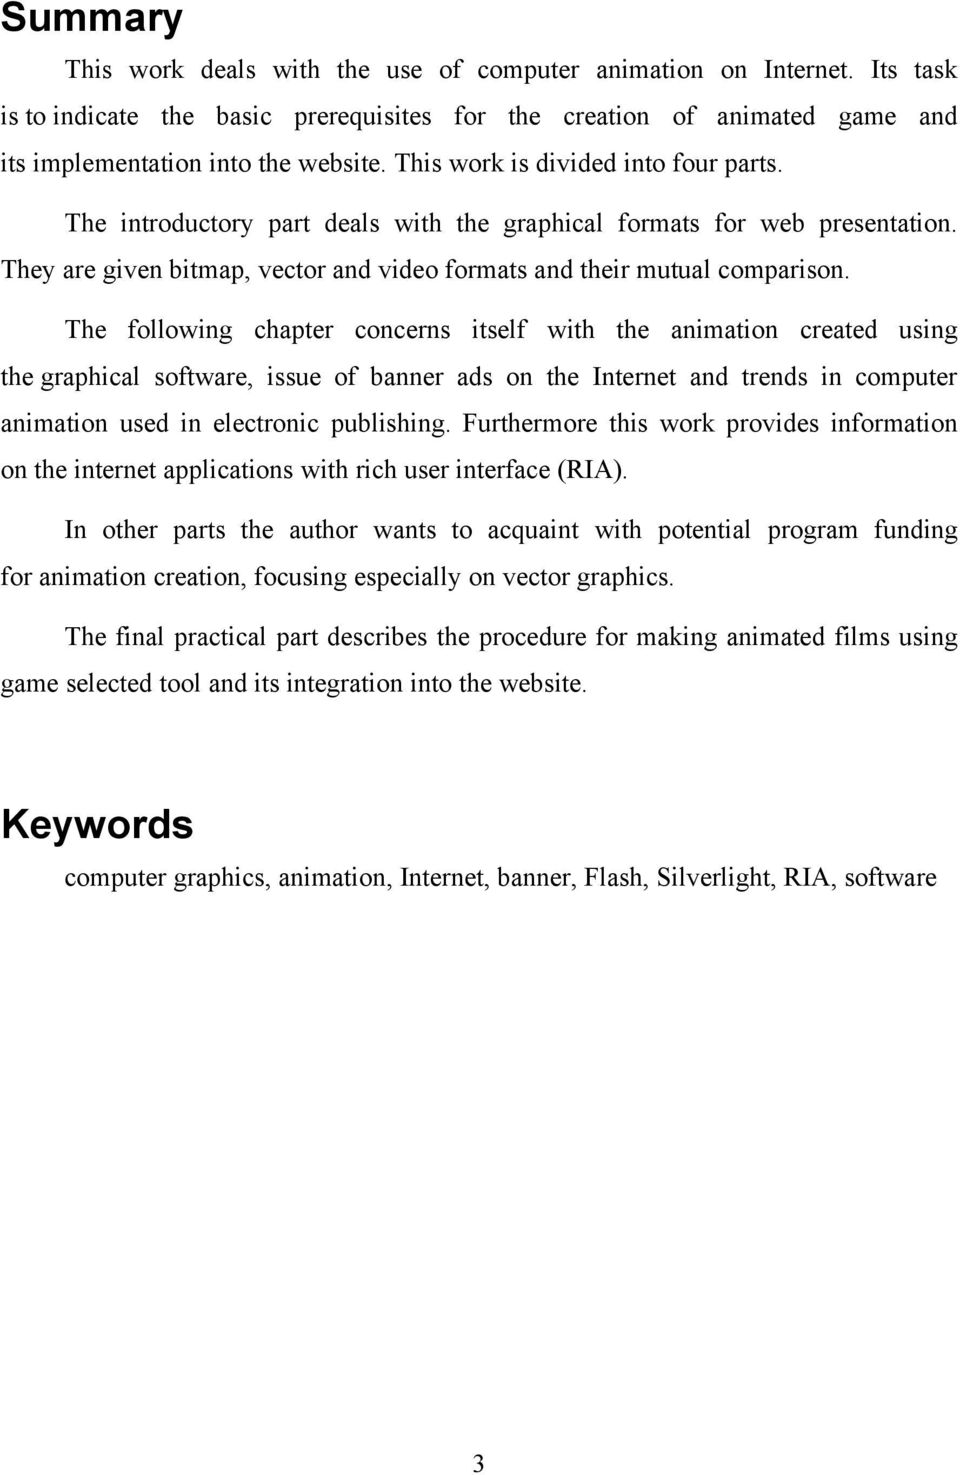 The following chapter concerns itself with the animation created using the graphical software, issue of banner ads on the Internet and trends in computer animation used in electronic publishing.